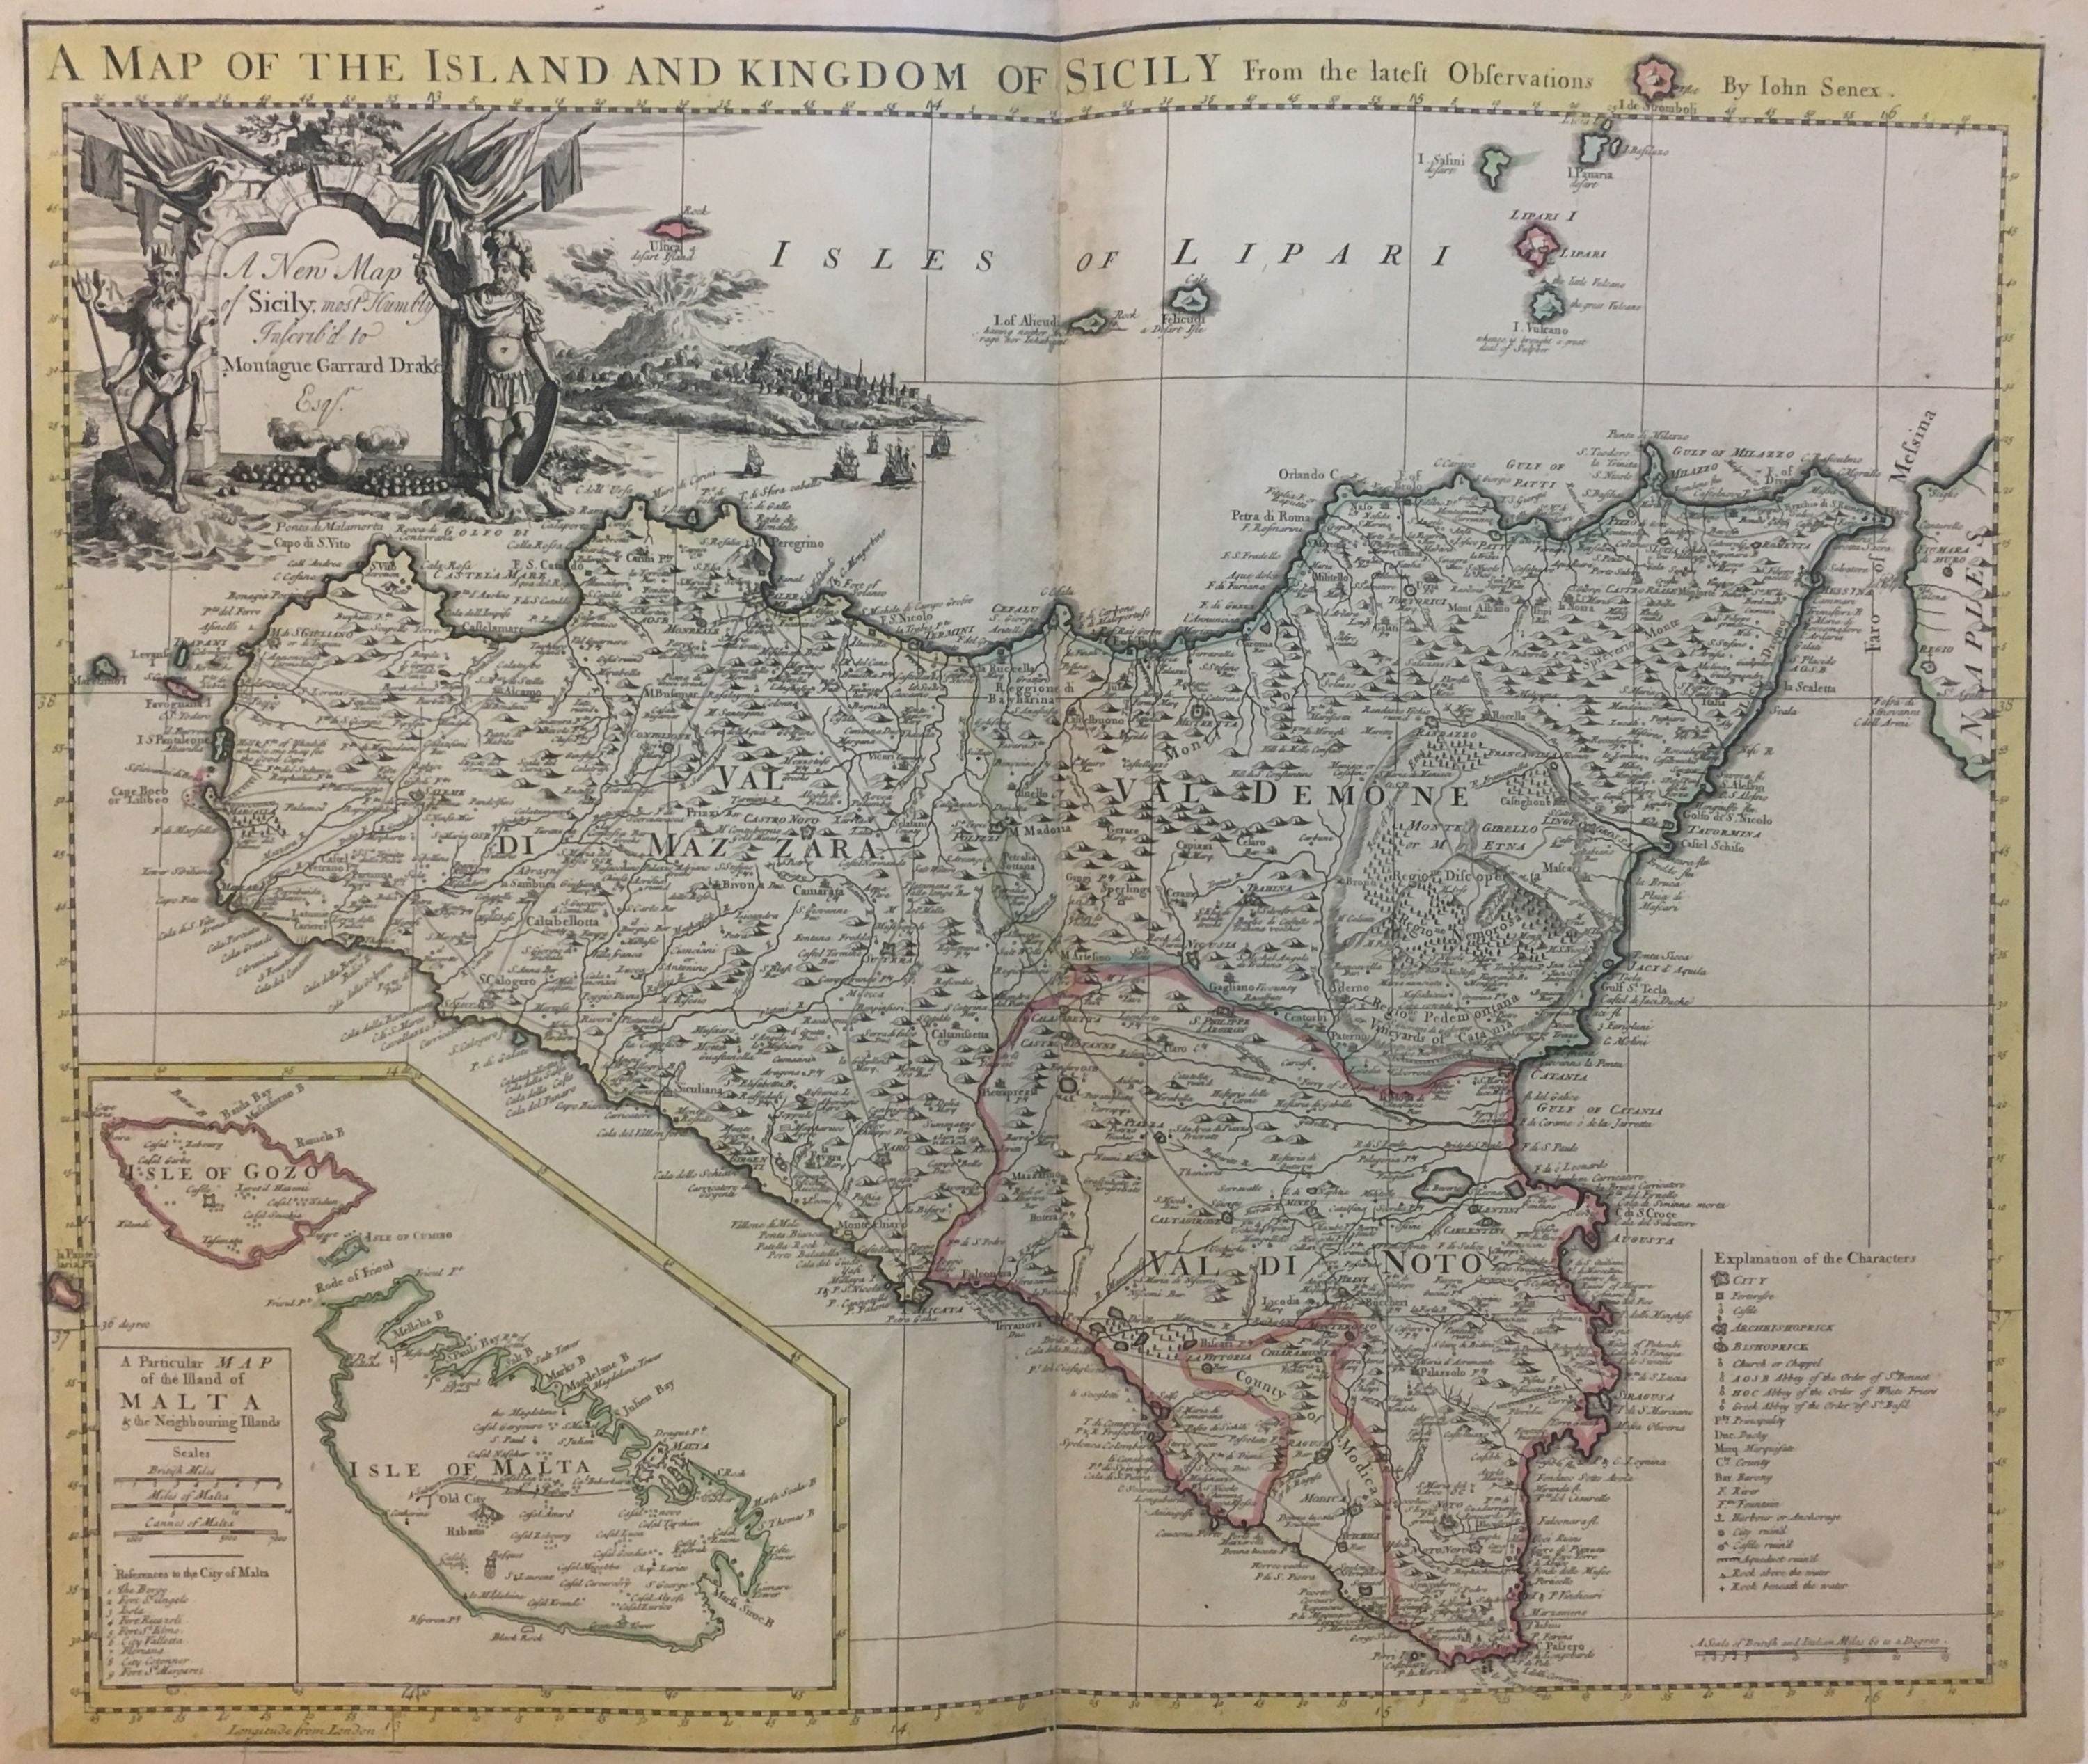 A Map of the Island and Kingdom of Sicily From the latest observations; A New Map of Sicily, most Humbly Inscrd to Montague Garrard Drake Esq John SENEX pic